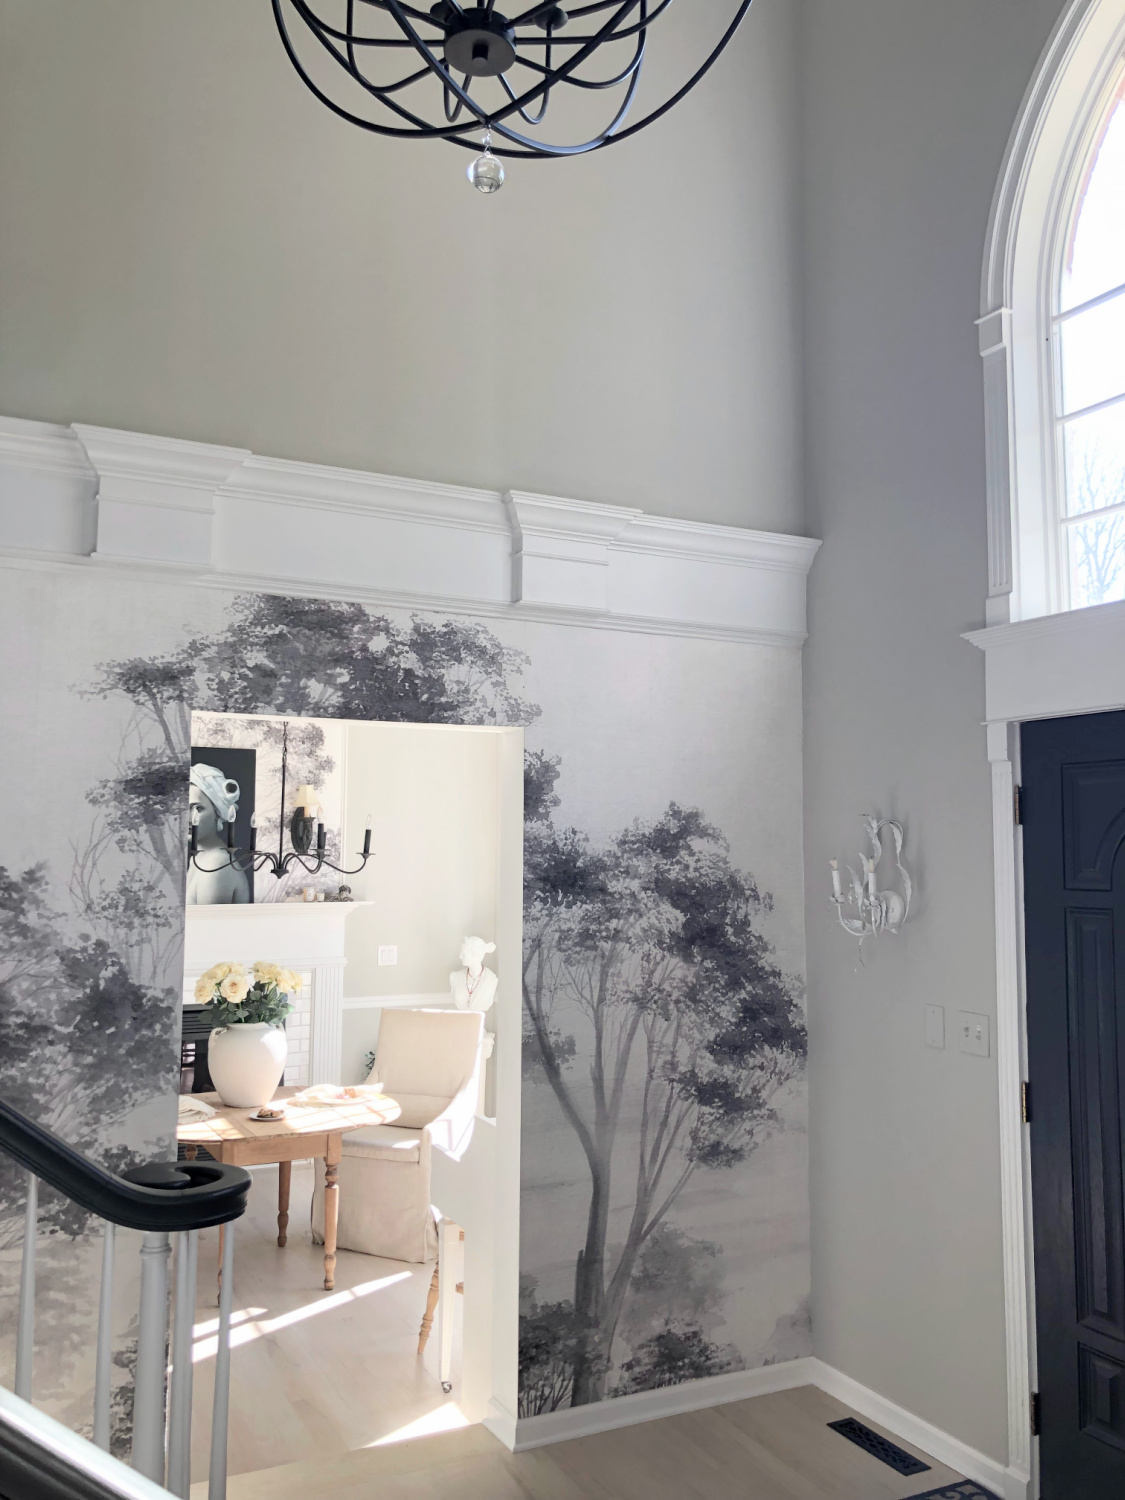 Hello Lovely's modern French entry with scenic tree mural wallpaper and serene dining room with fireplace.